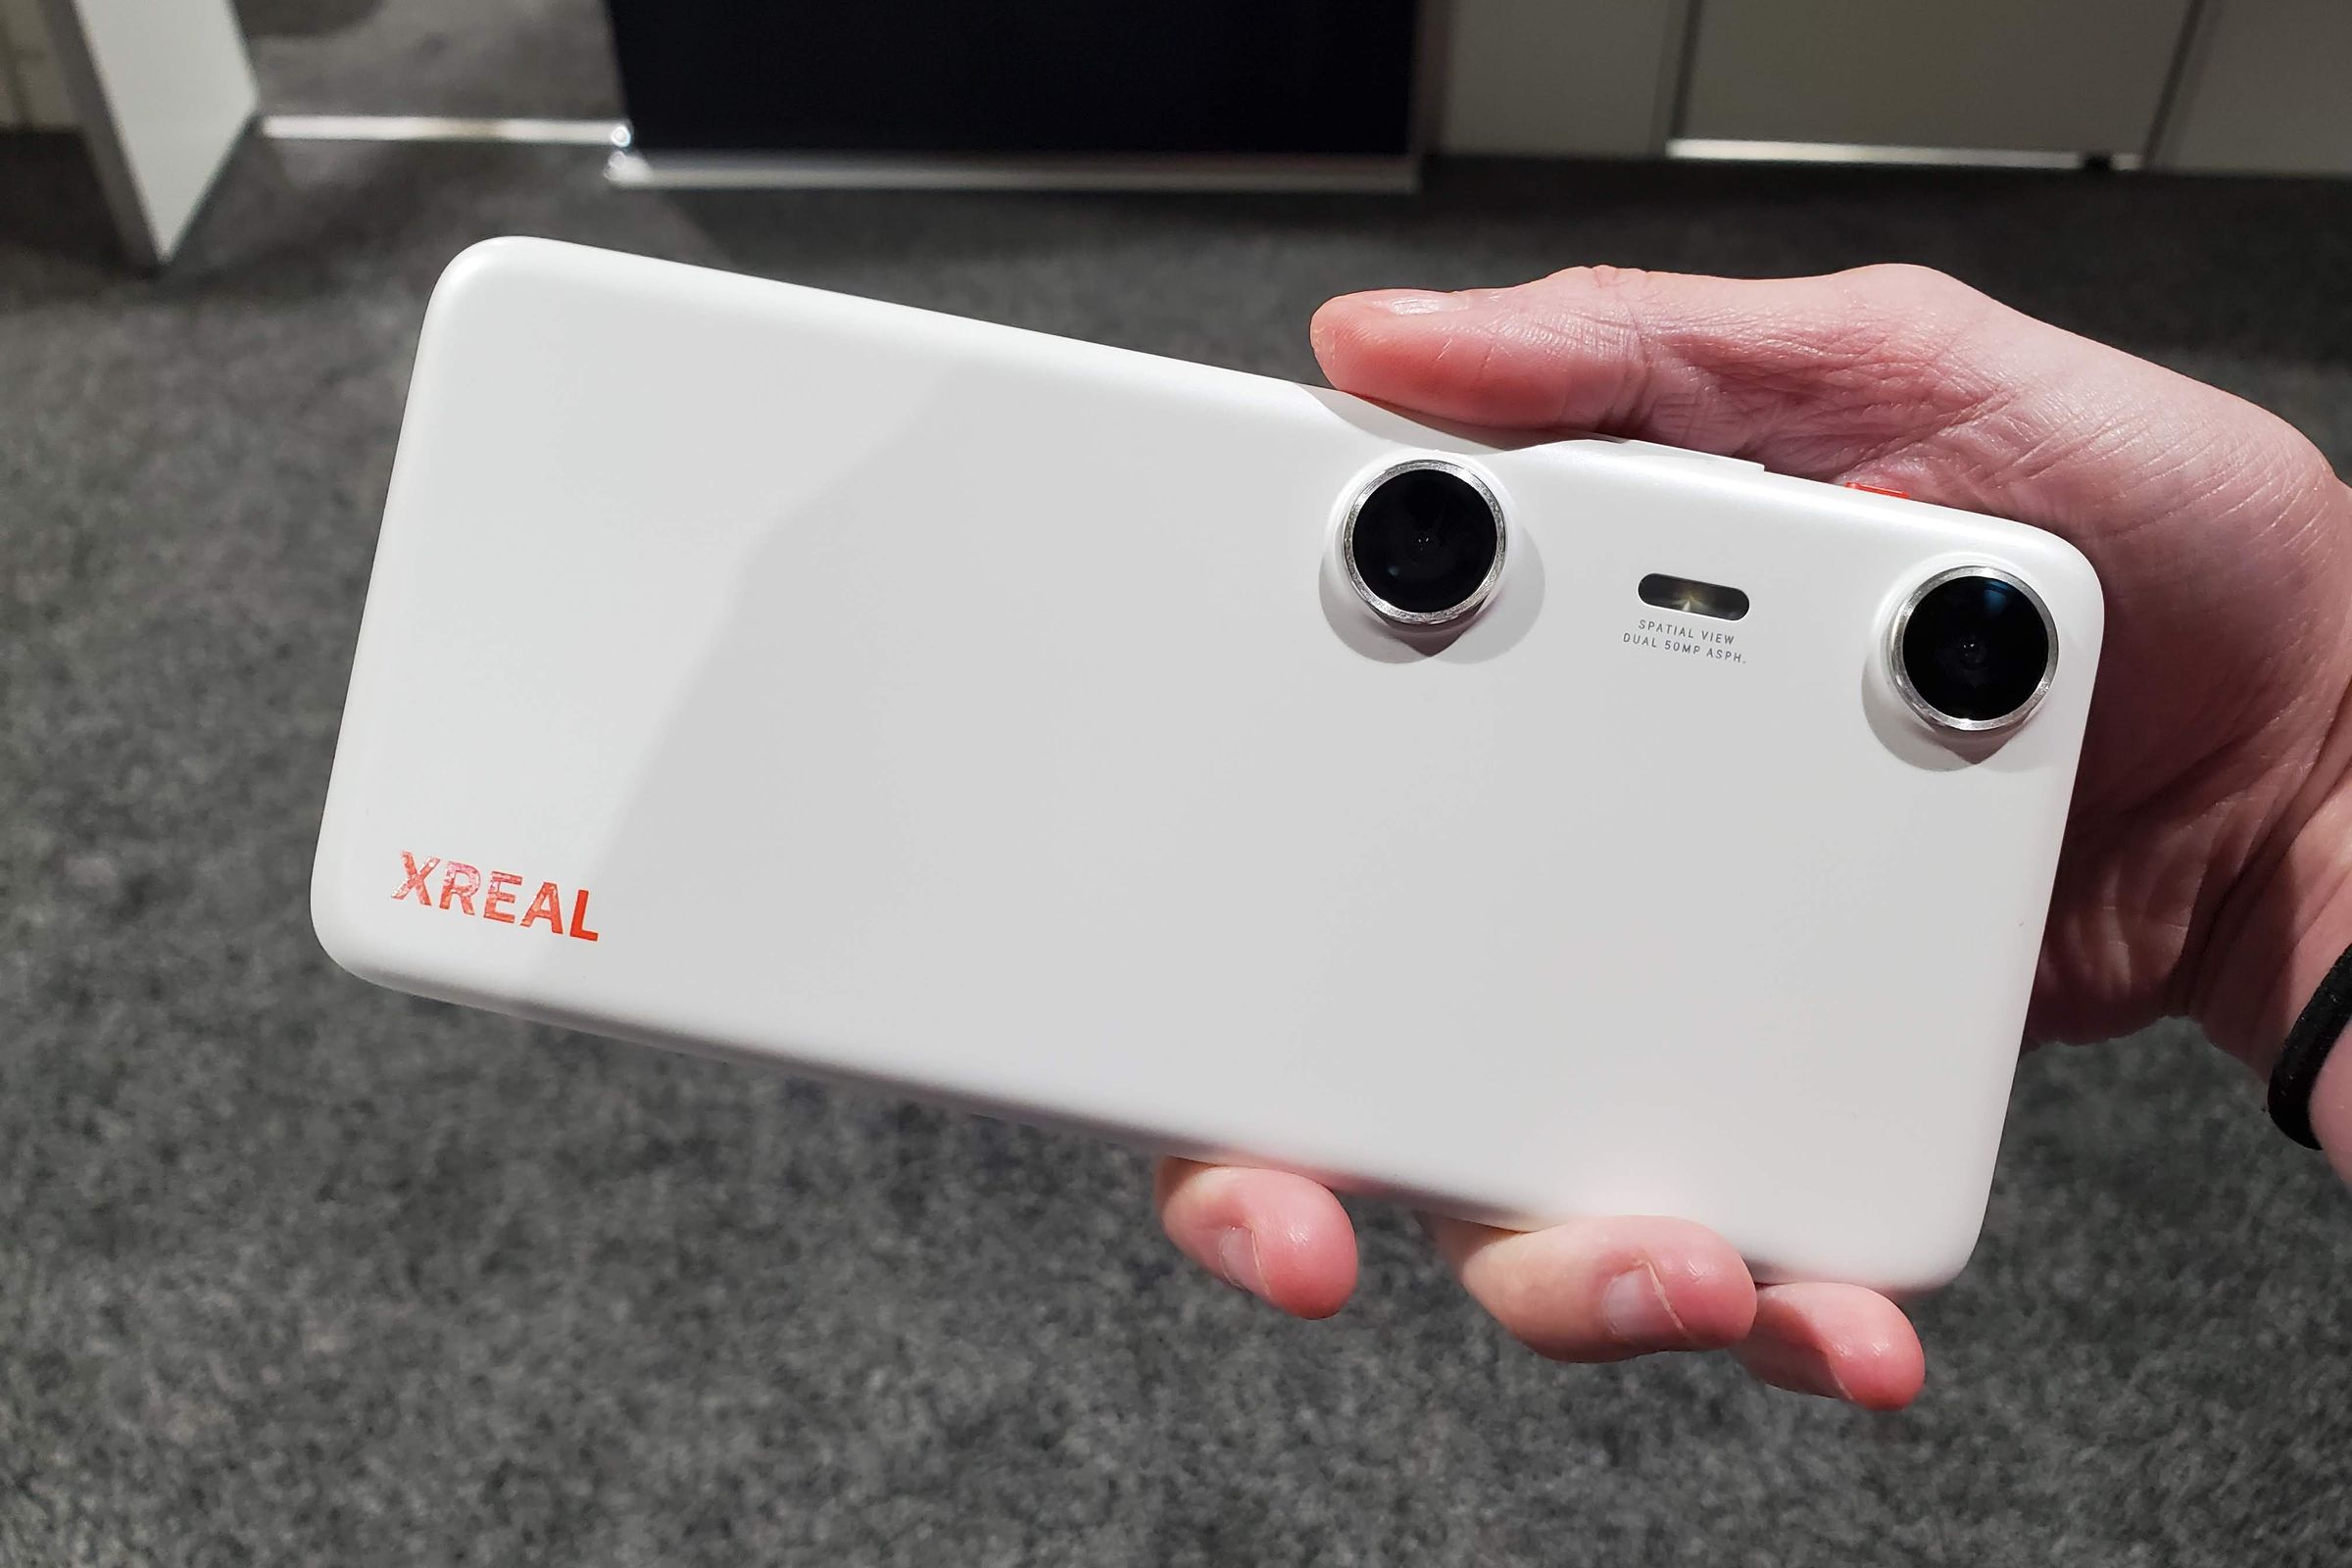 The back of the Xreal Beam Pro, a chunky white Android tablet.